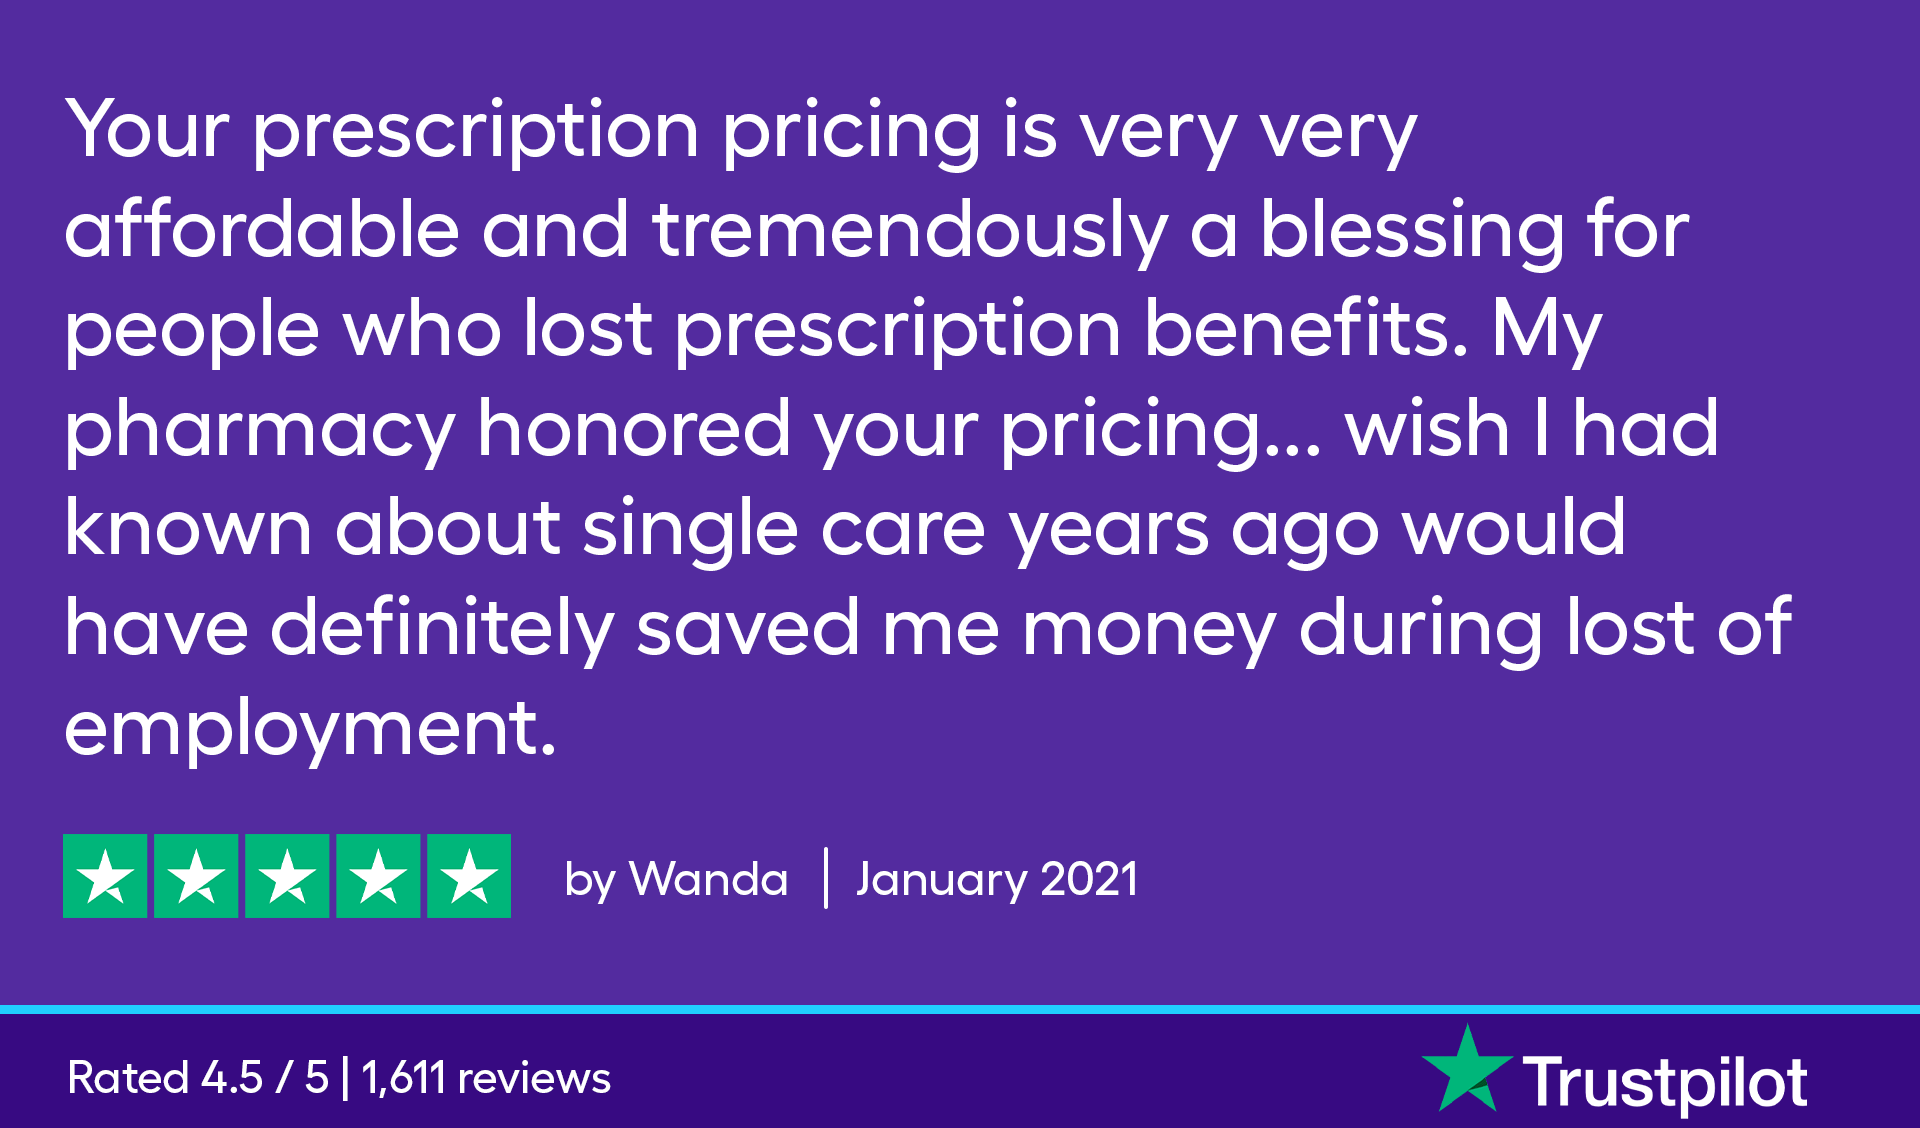 Your prescription pricing is very very affordable and tremendously a blessing for people who lost prescription benefits. My pharmacy honored your pricing....wish I had known about SingleCare years ago would have definitely saved me money during lost of employment.